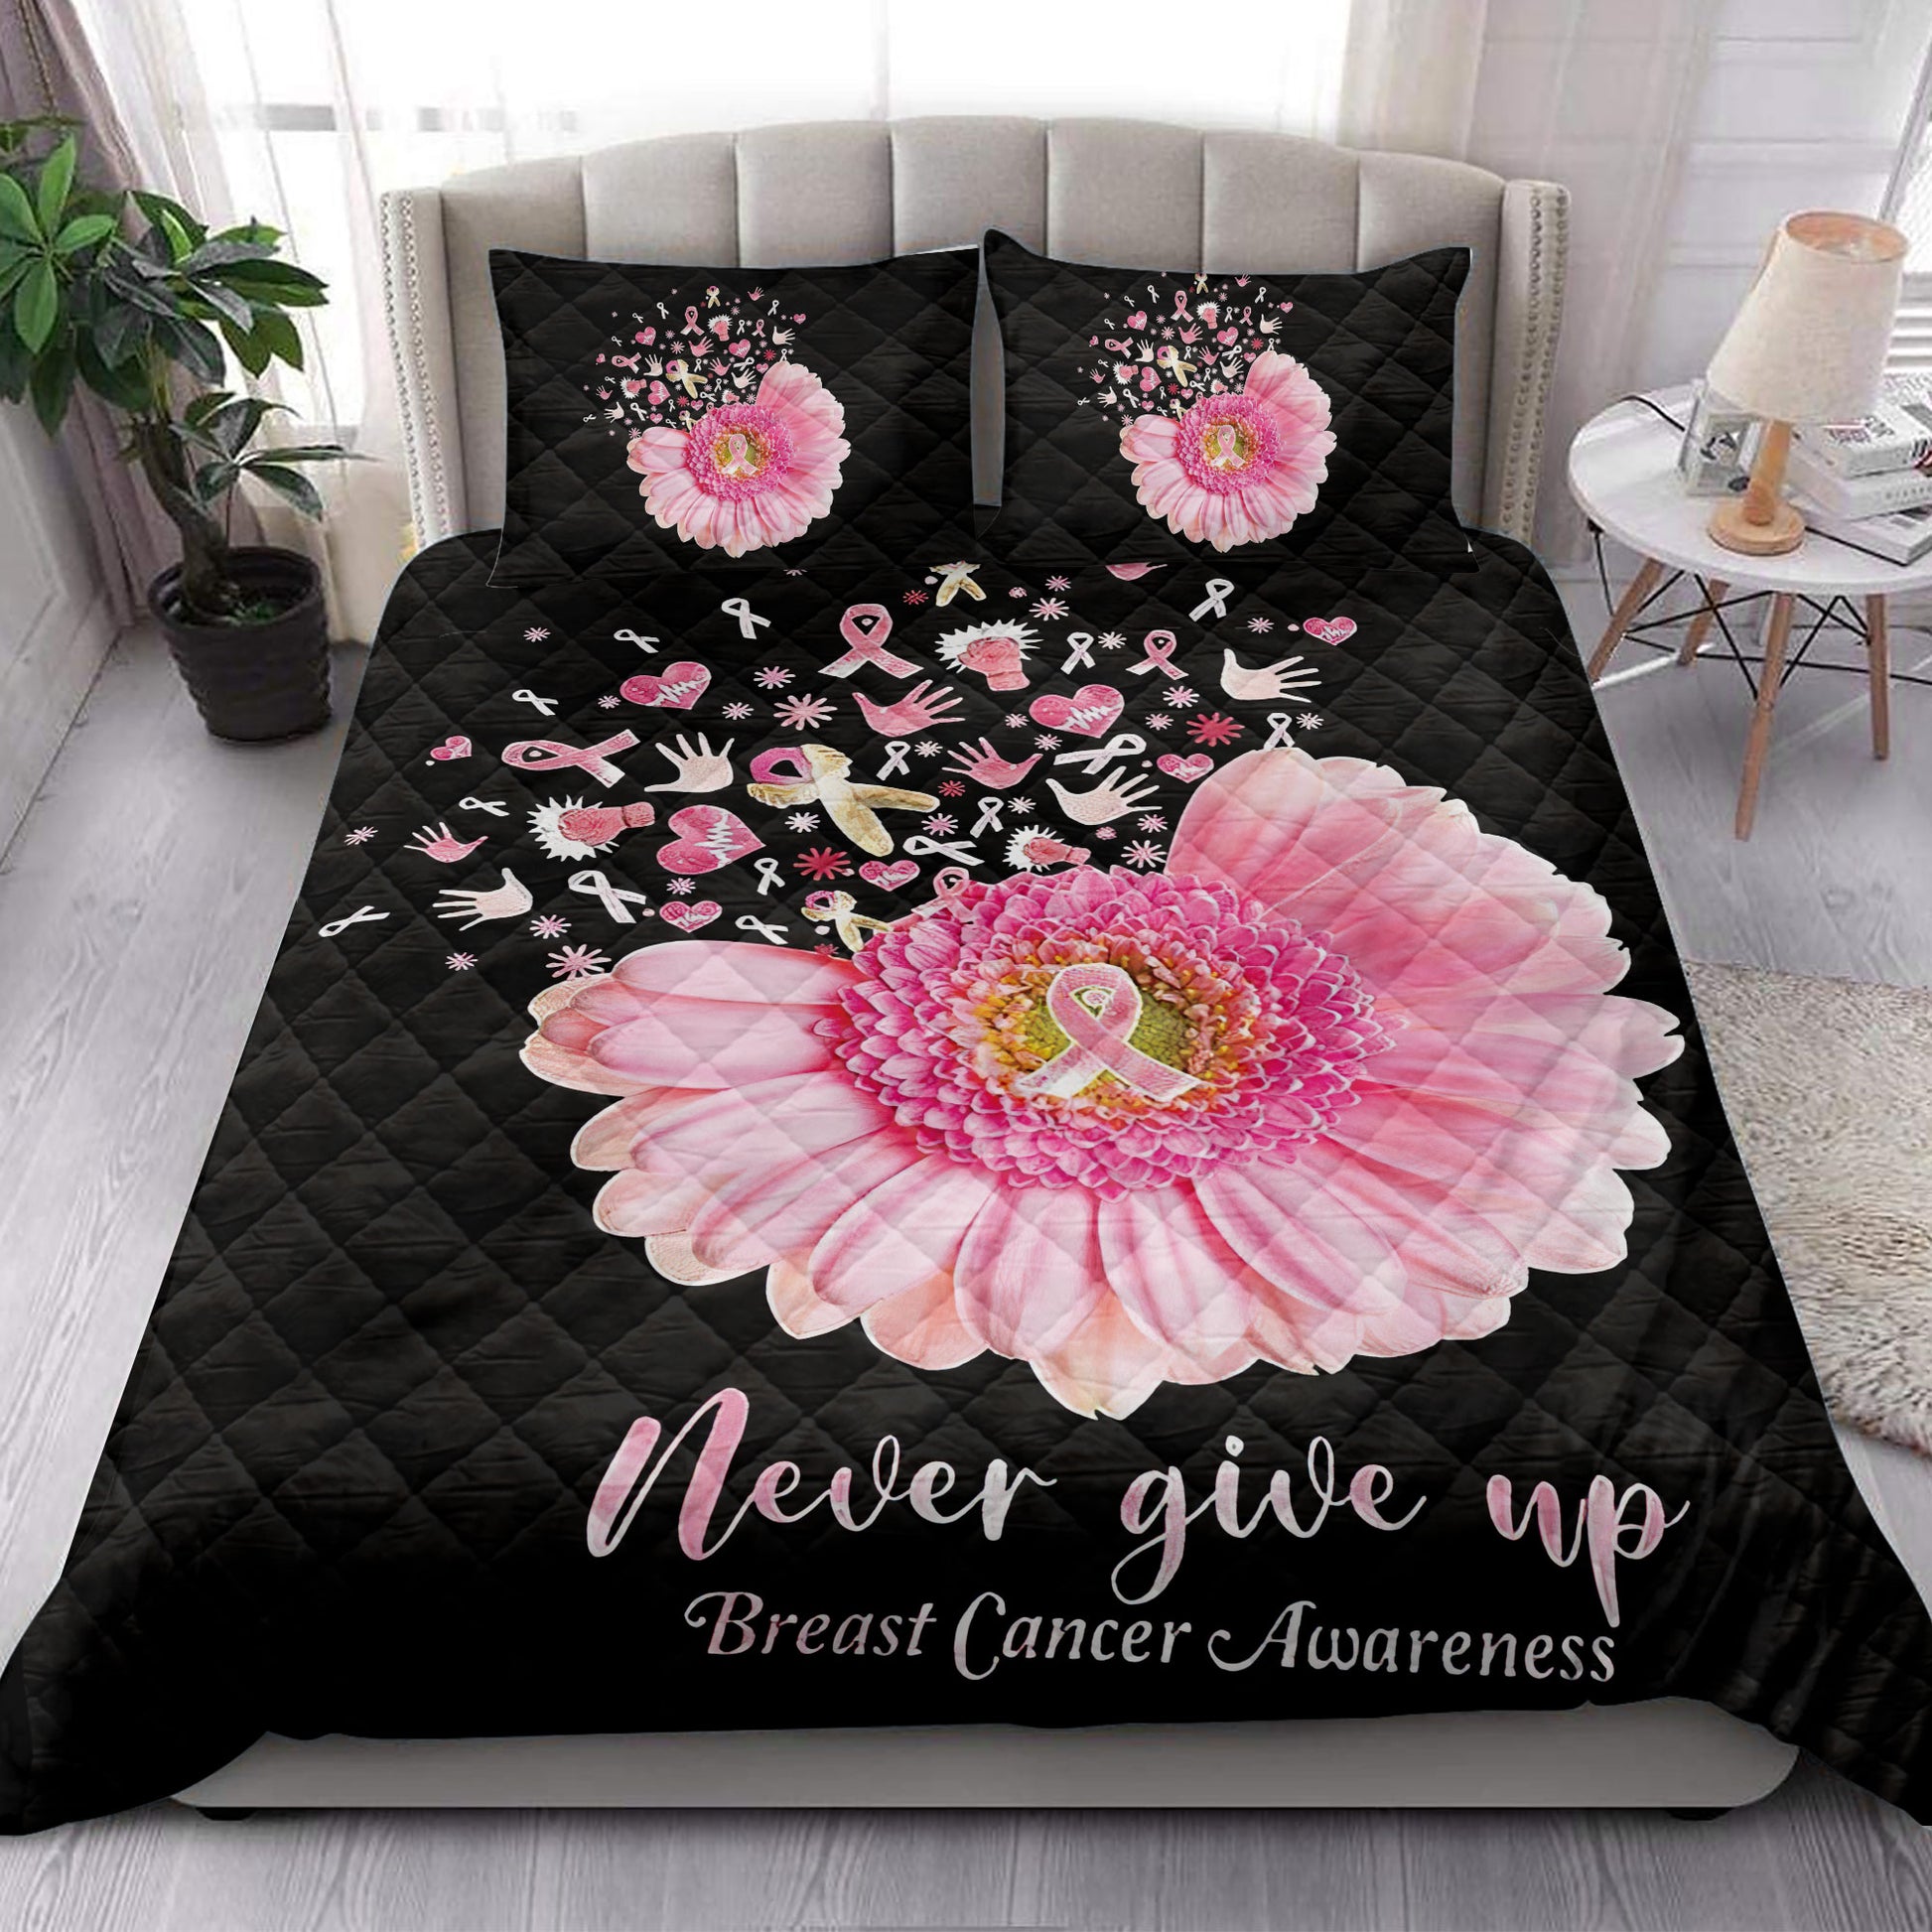 Ohaprints-Quilt-Bed-Set-Pillowcase-Breast-Cancer-Awareness-Never-Give-Up-Blanket-Bedspread-Bedding-3838-King (90'' x 100'')